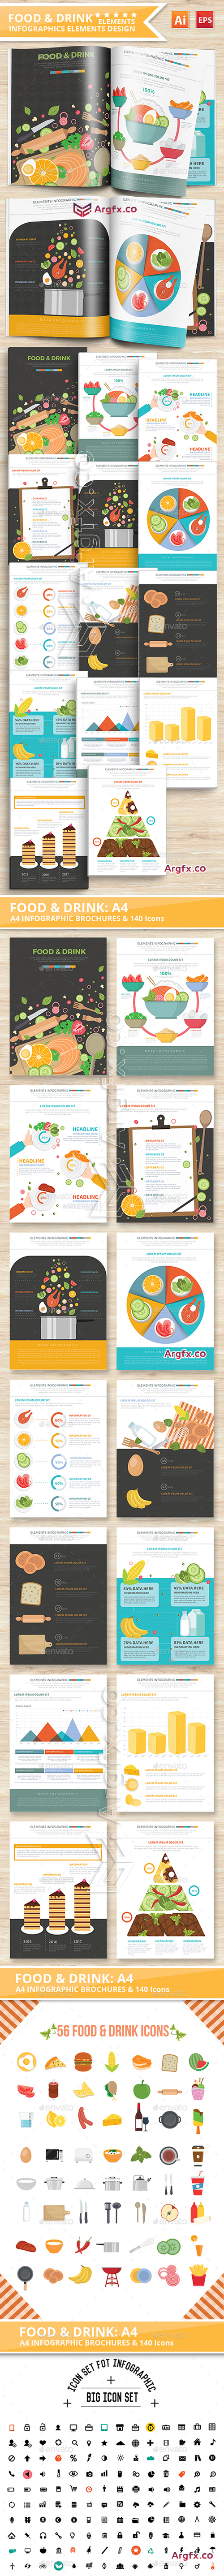  Food & Drink infographic Template Design